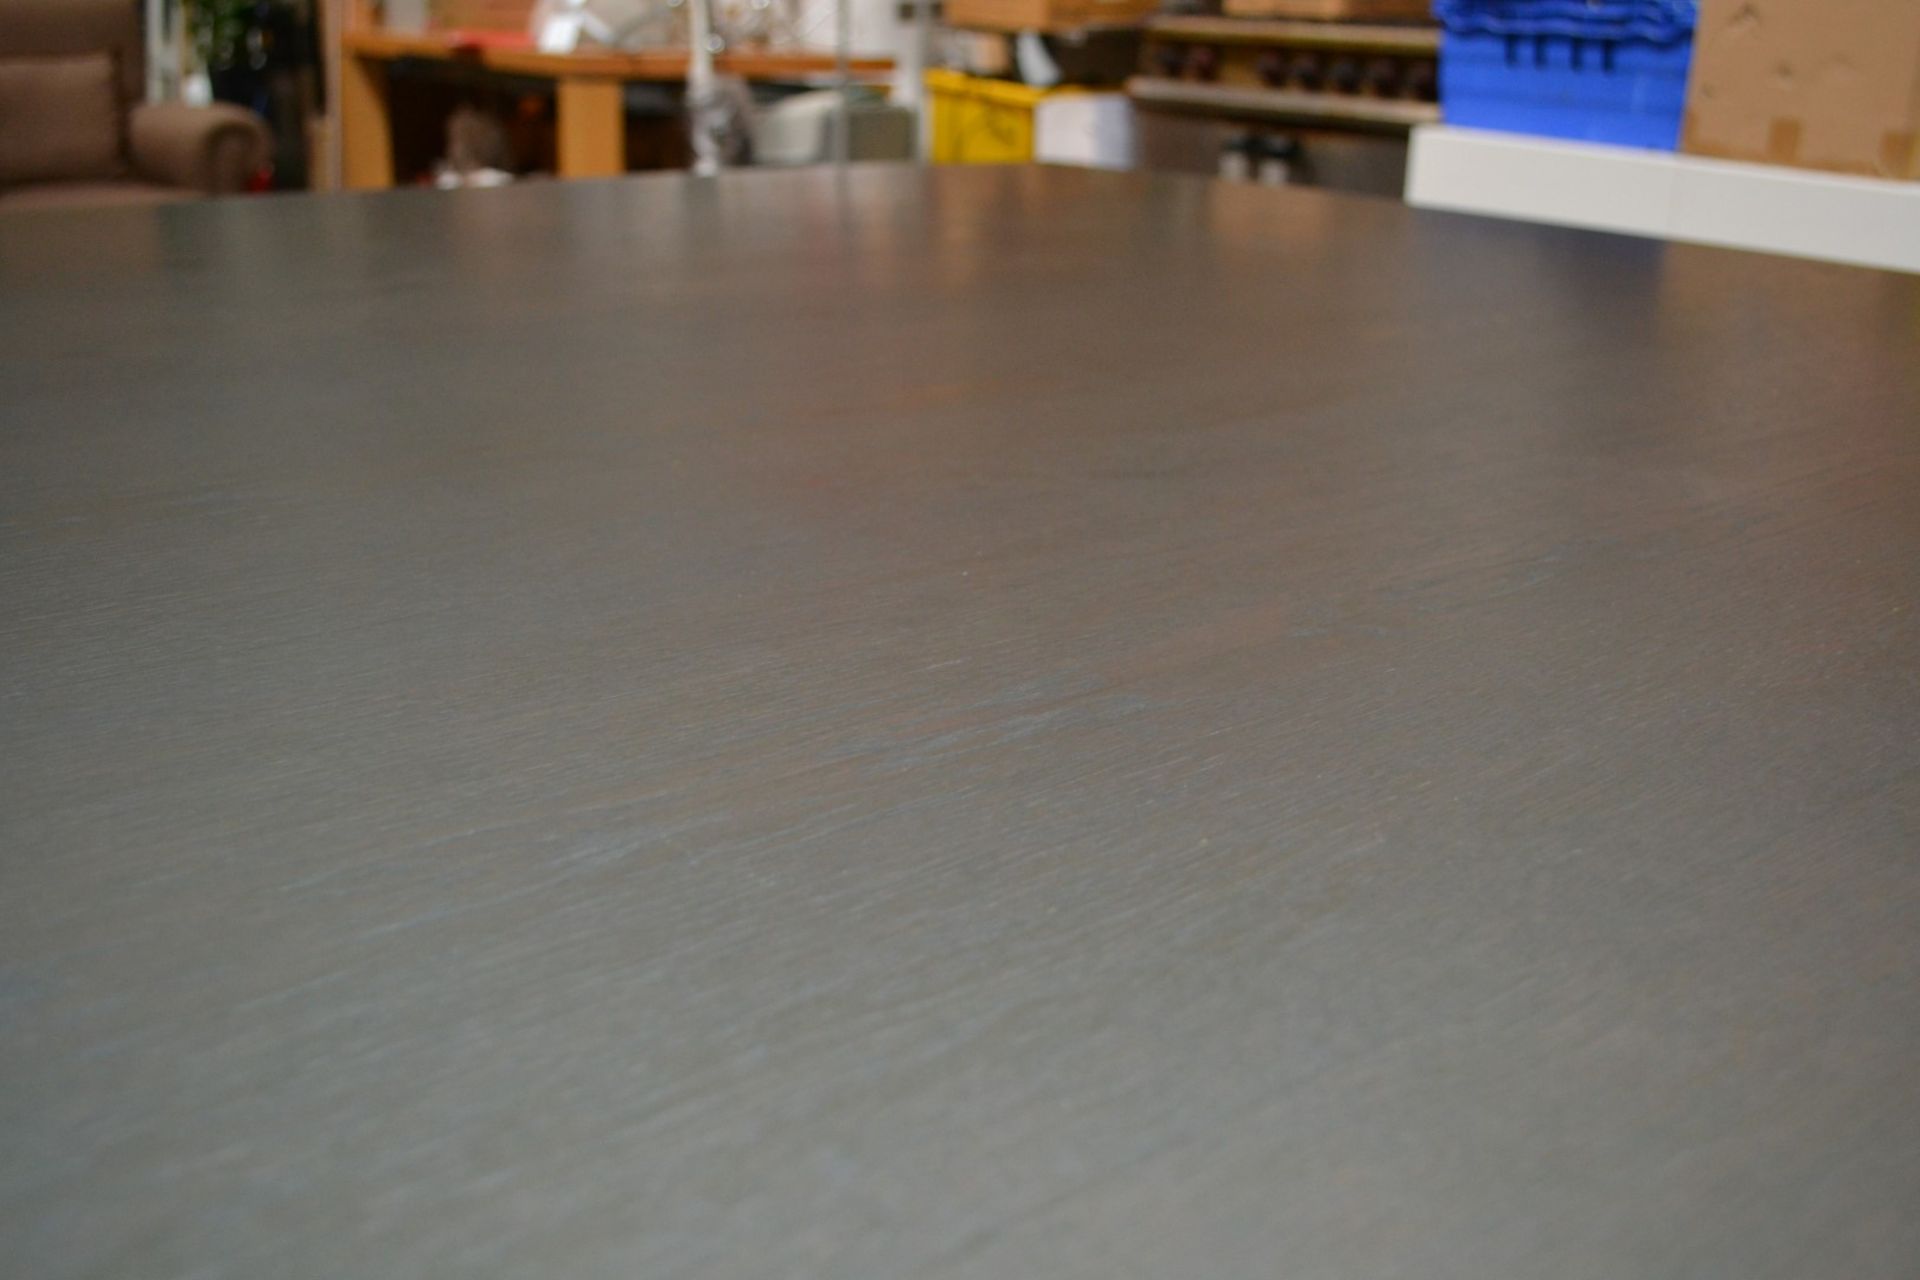 1 x Large Square Wooden Dining Table in a Grey Oak Coloured Finish - CL314 - Location: Altrincham - Image 5 of 10